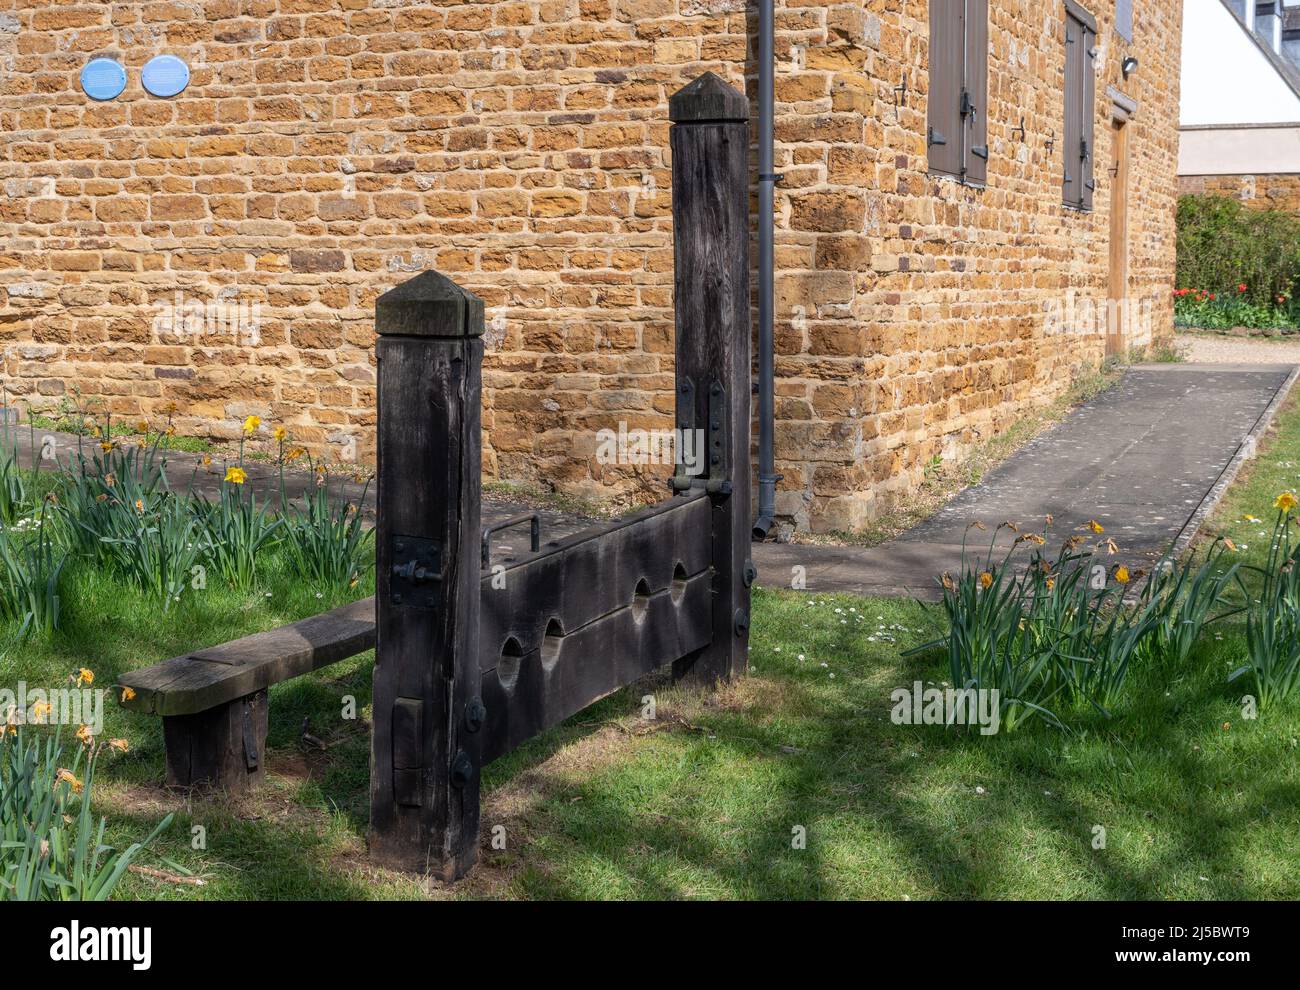 The Heritage Centre with wooden stocks in front, Brixworth village, Northamptonshire, UK; the stocks areprobably 1960's replacements of the originals Stock Photo